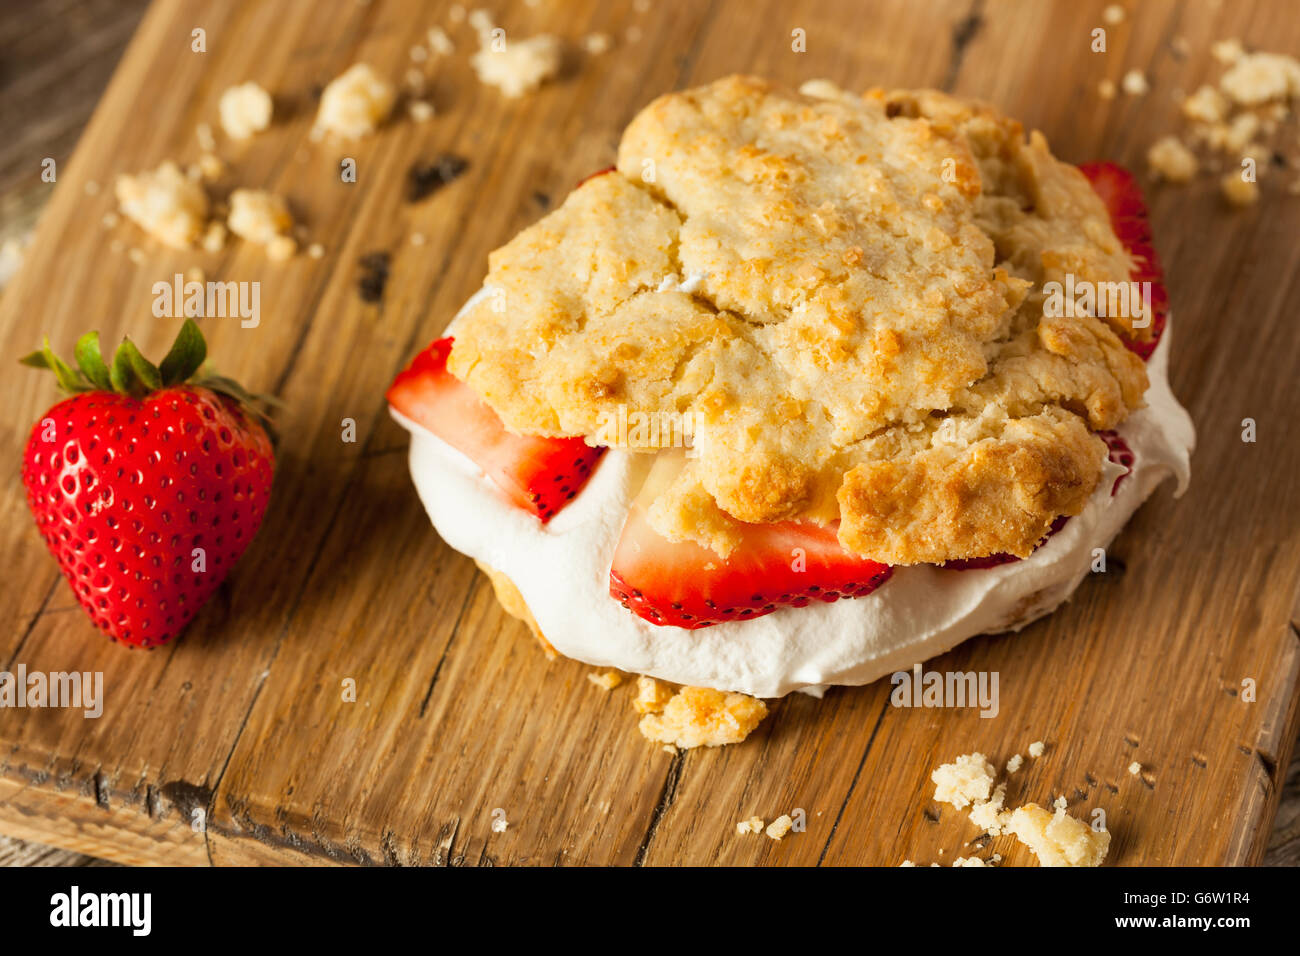 Homemade Strawberry Shortcake with Whipped Cream Ready to Eat Stock Photo